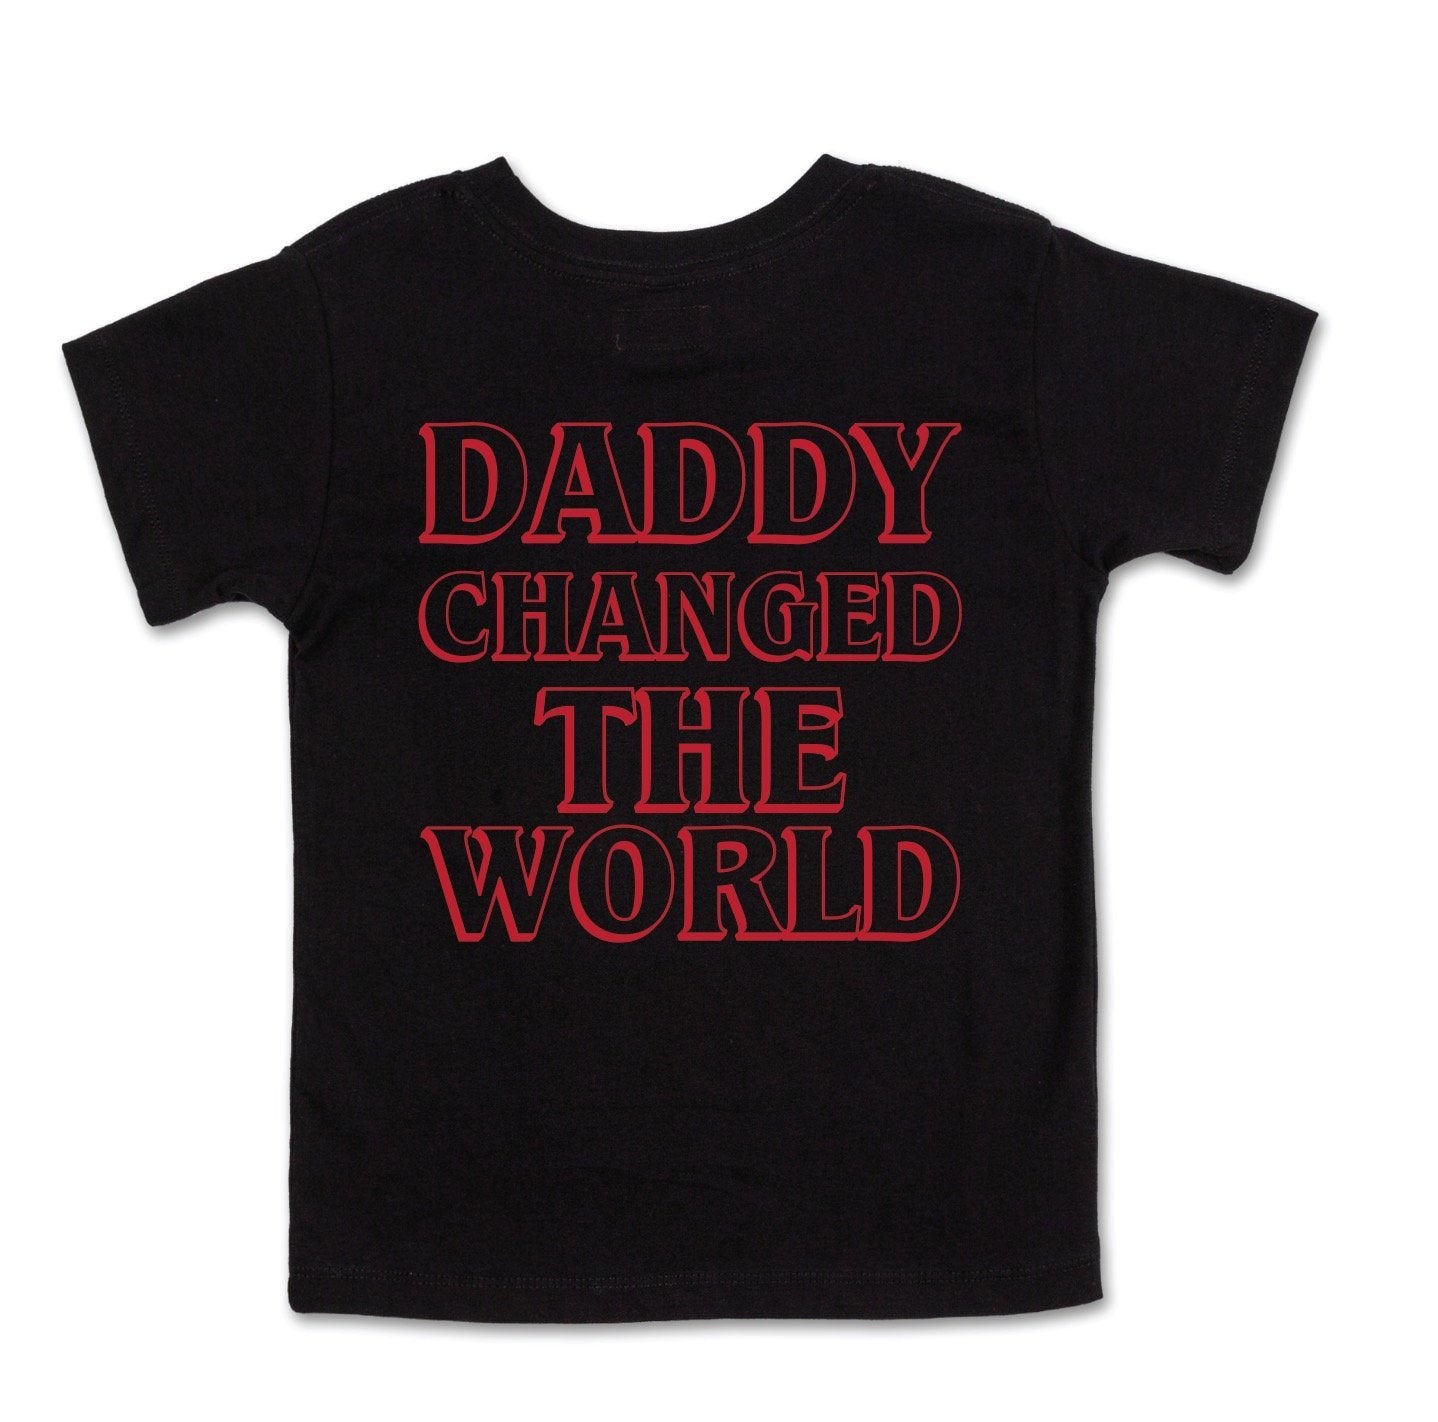 Daddy Changed The World Tee (Black) Tops Haus of JR 